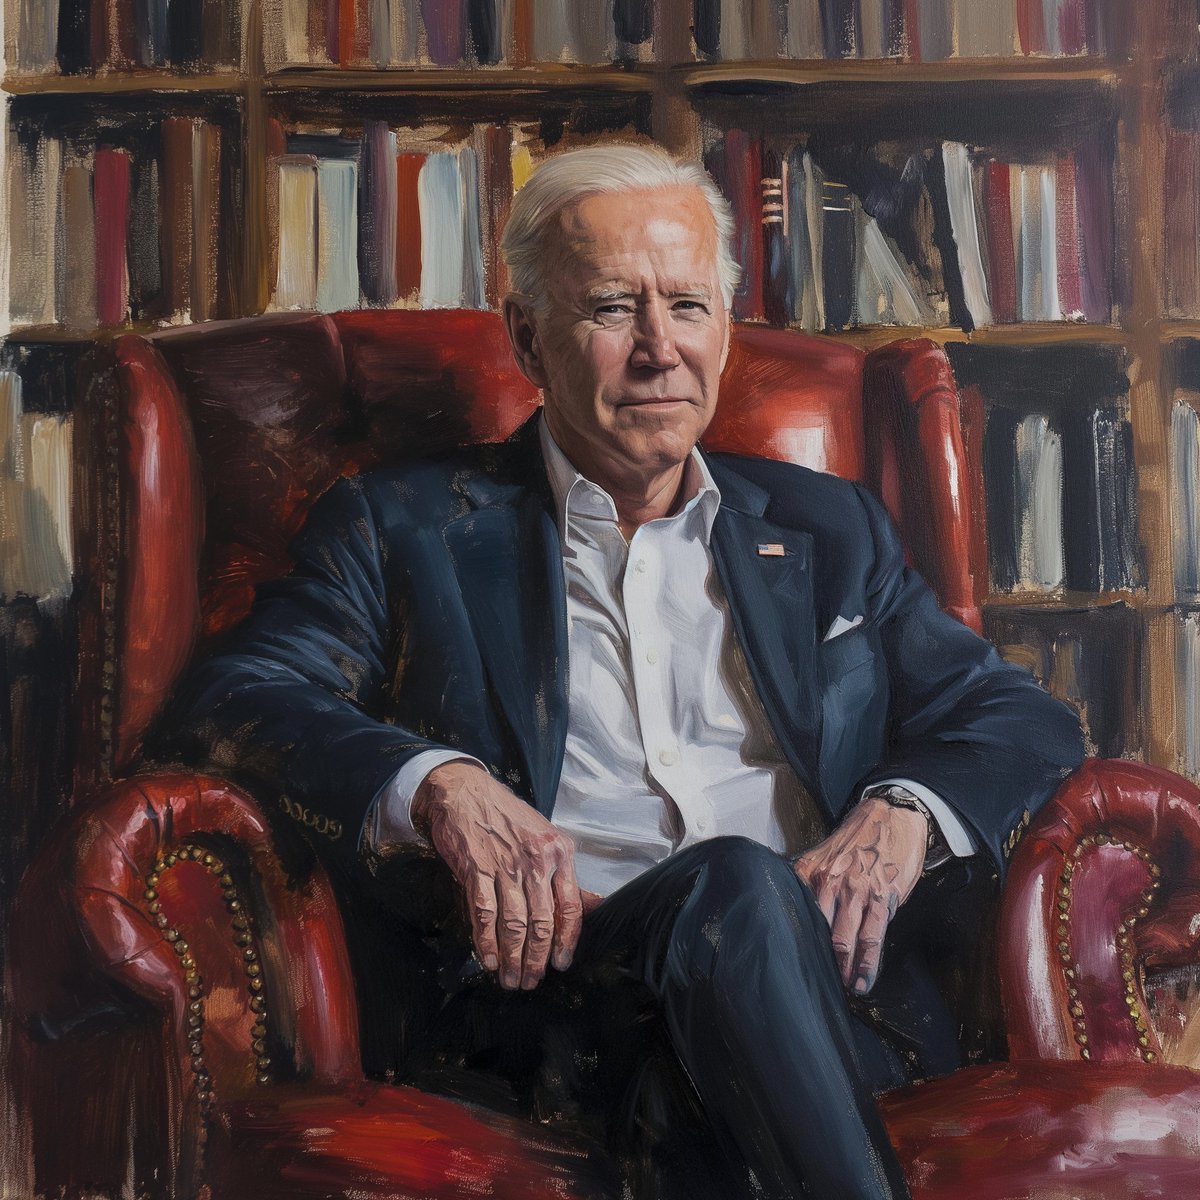 Good morning and Happy Friday to everyone who understands that: A vote for No Labels is a vote for trump A vote for RFK Jr. is a vote for trump A vote for uncommitted is a vote for trump Not voting is a vote for trump. A vote for Biden is a vote for Democracy. VOTE FOR BIDEN.